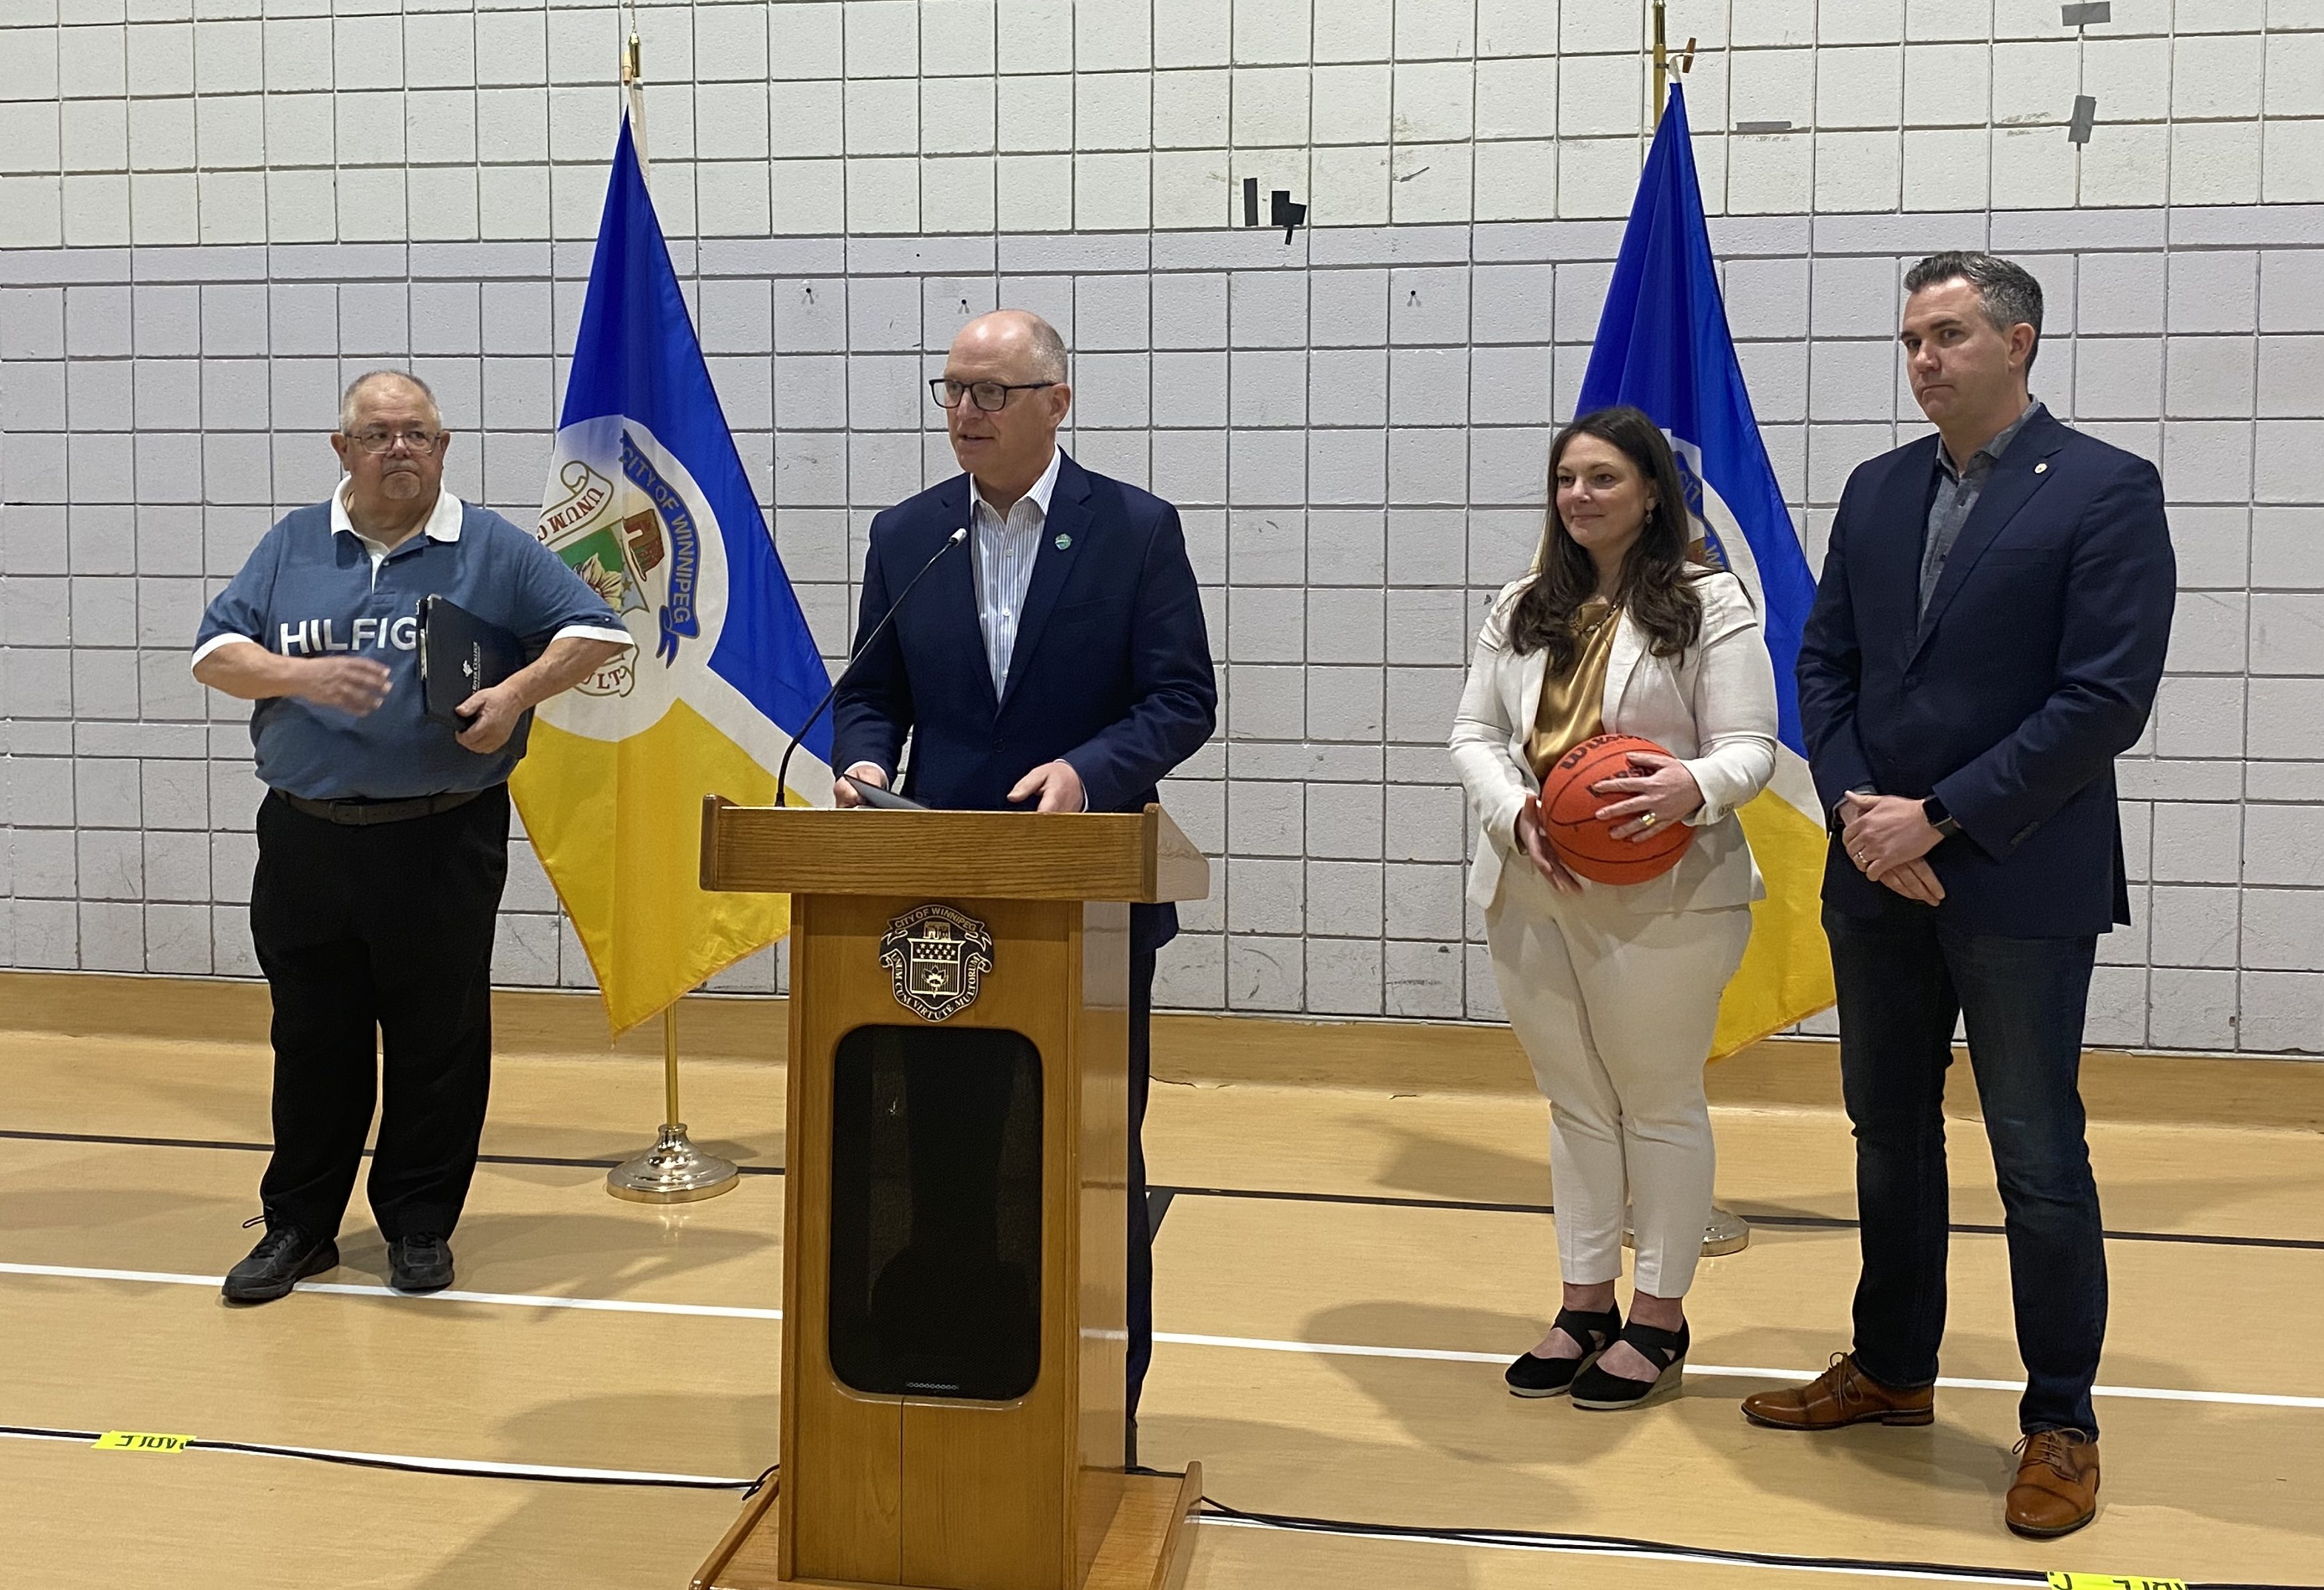 Winnipeg community centres receive grant funds for renovations